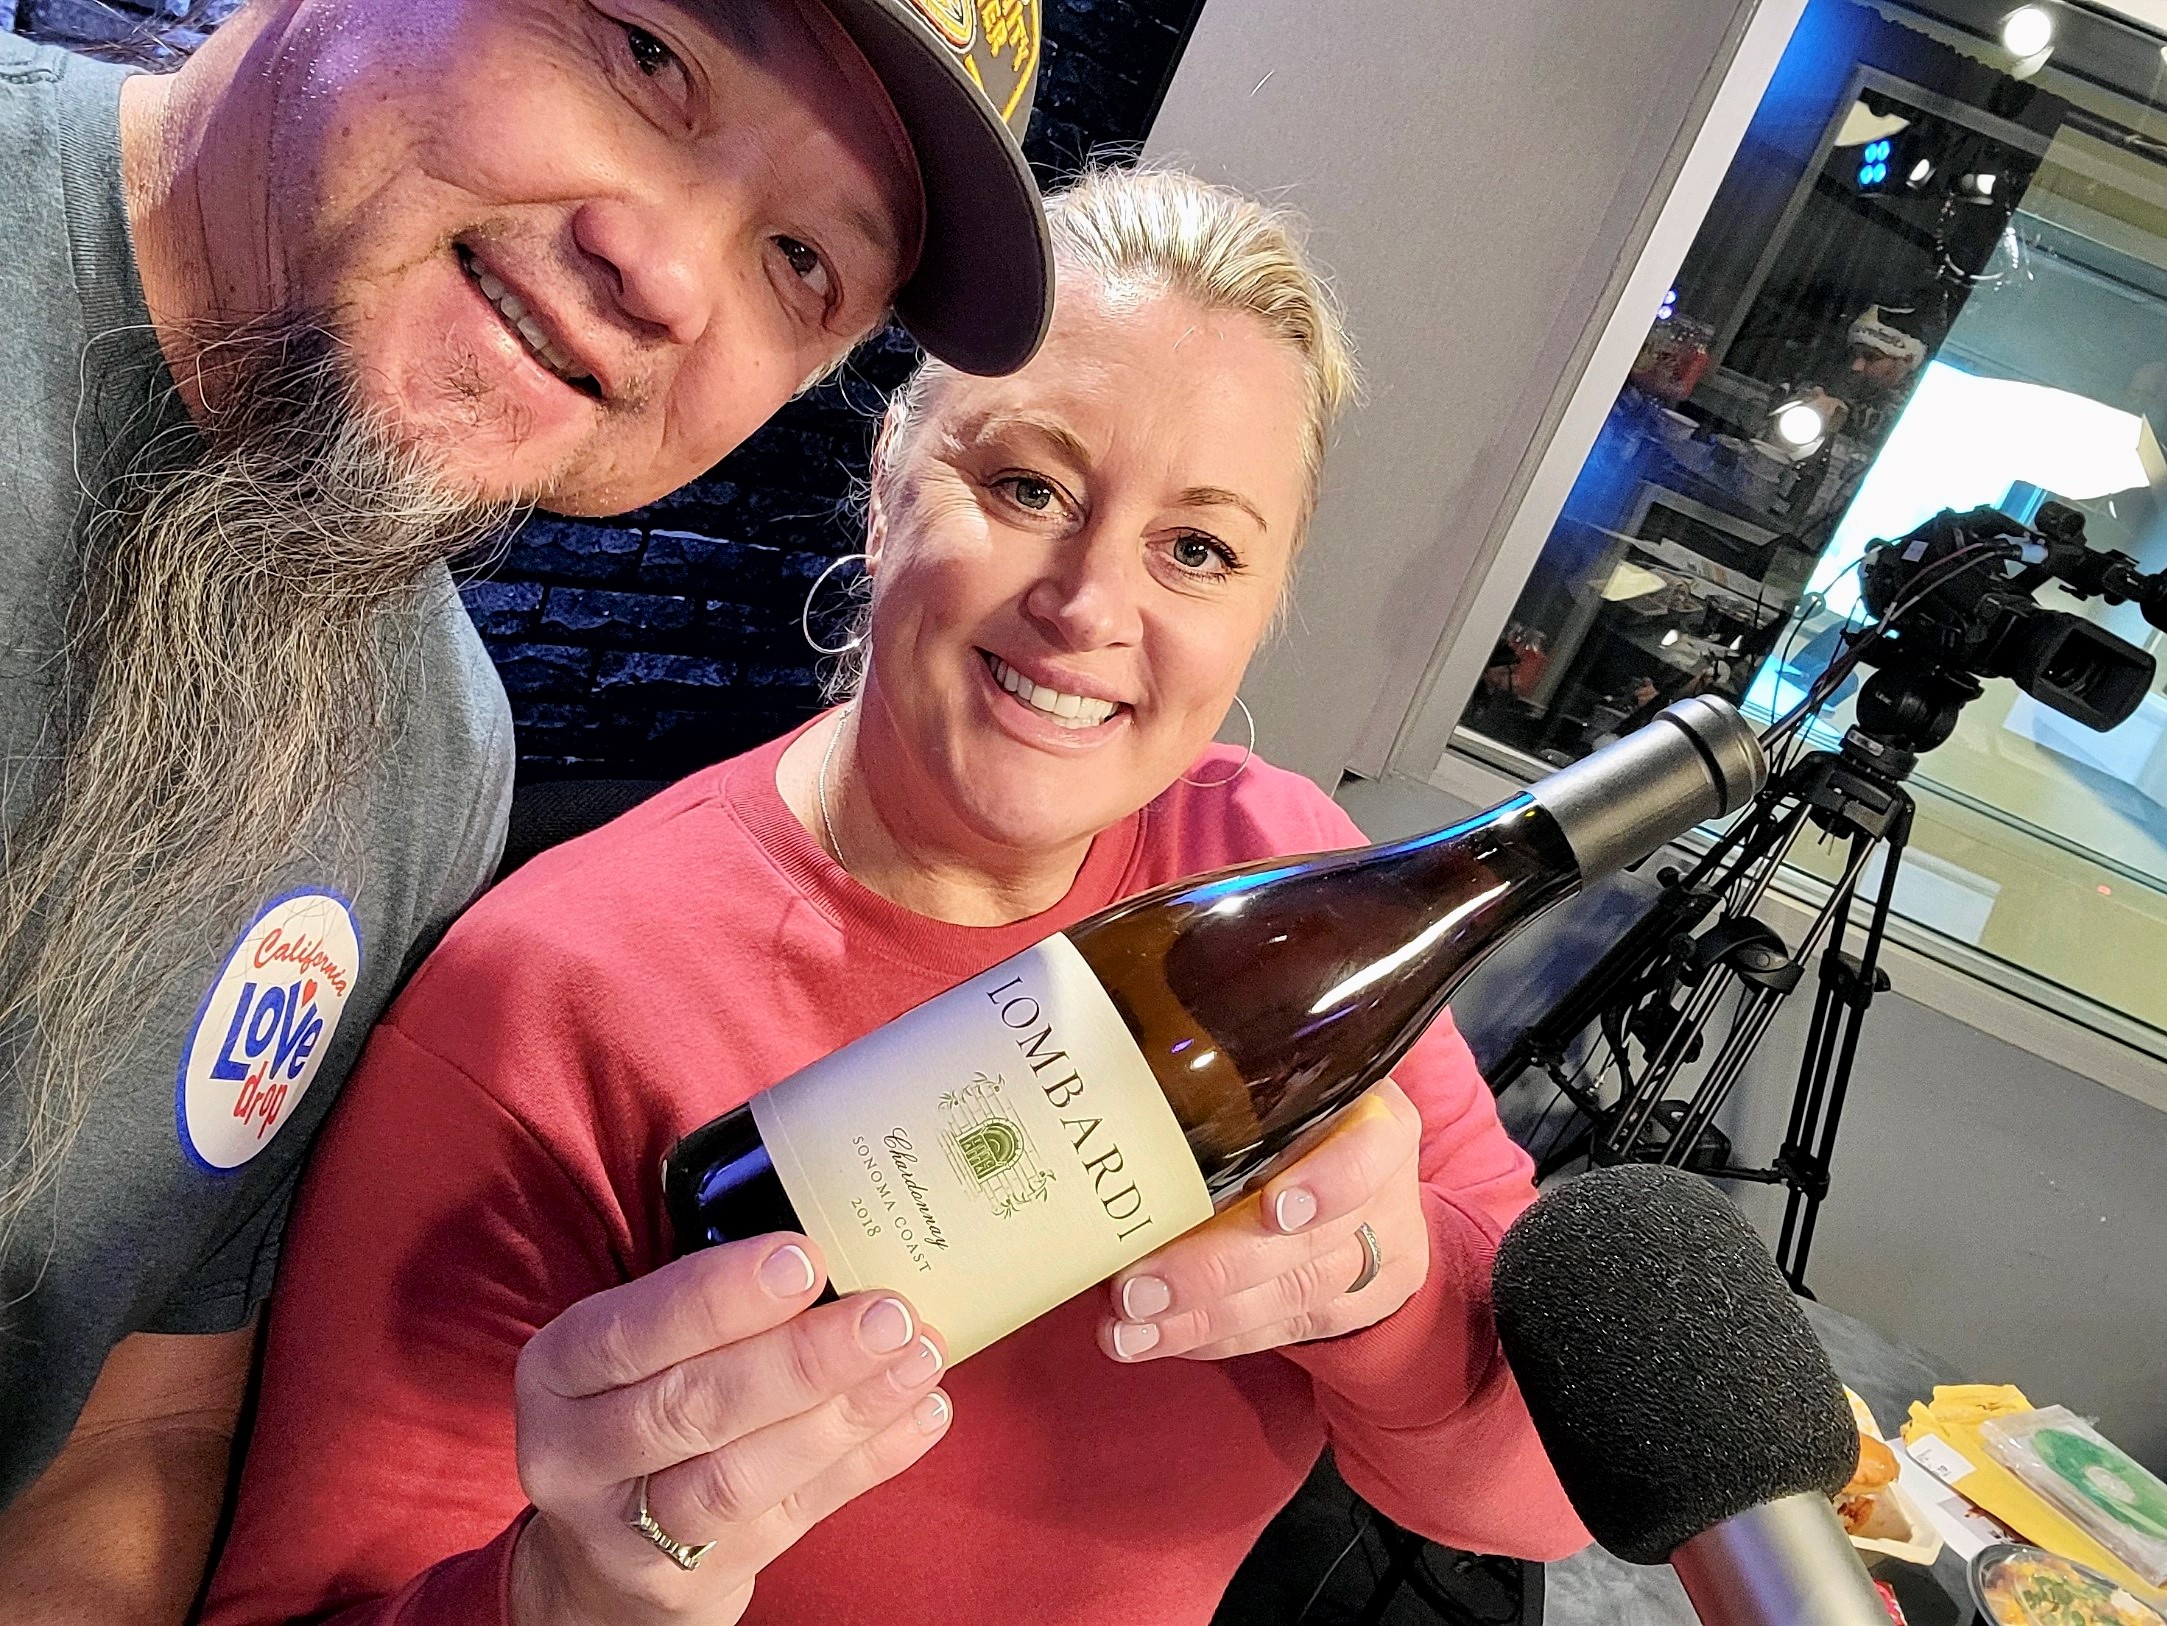 Wing_The Heidi and Frank Show_KLOS-FM